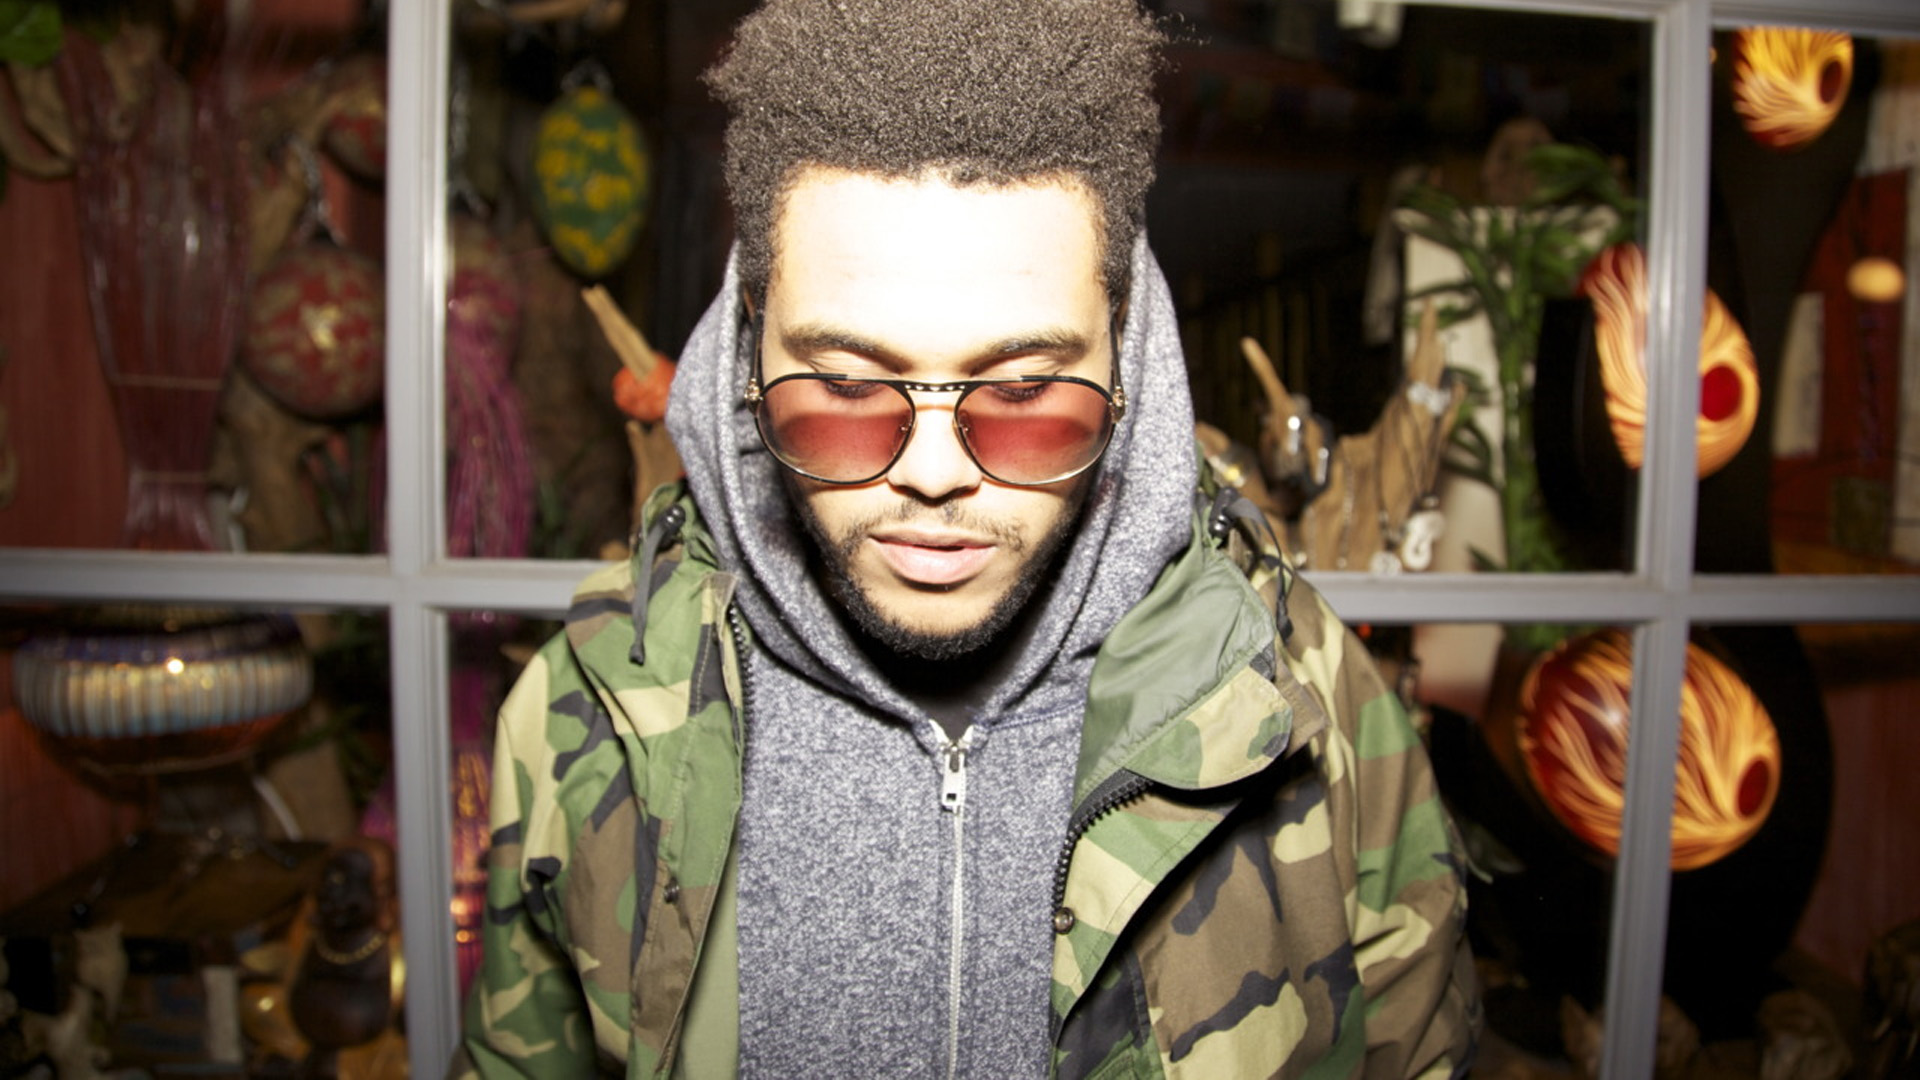 The Weeknd Wallpaper Iphone Wallpaper
the Weeknd Xo - Montreal The Weeknd , HD Wallpaper & Backgrounds